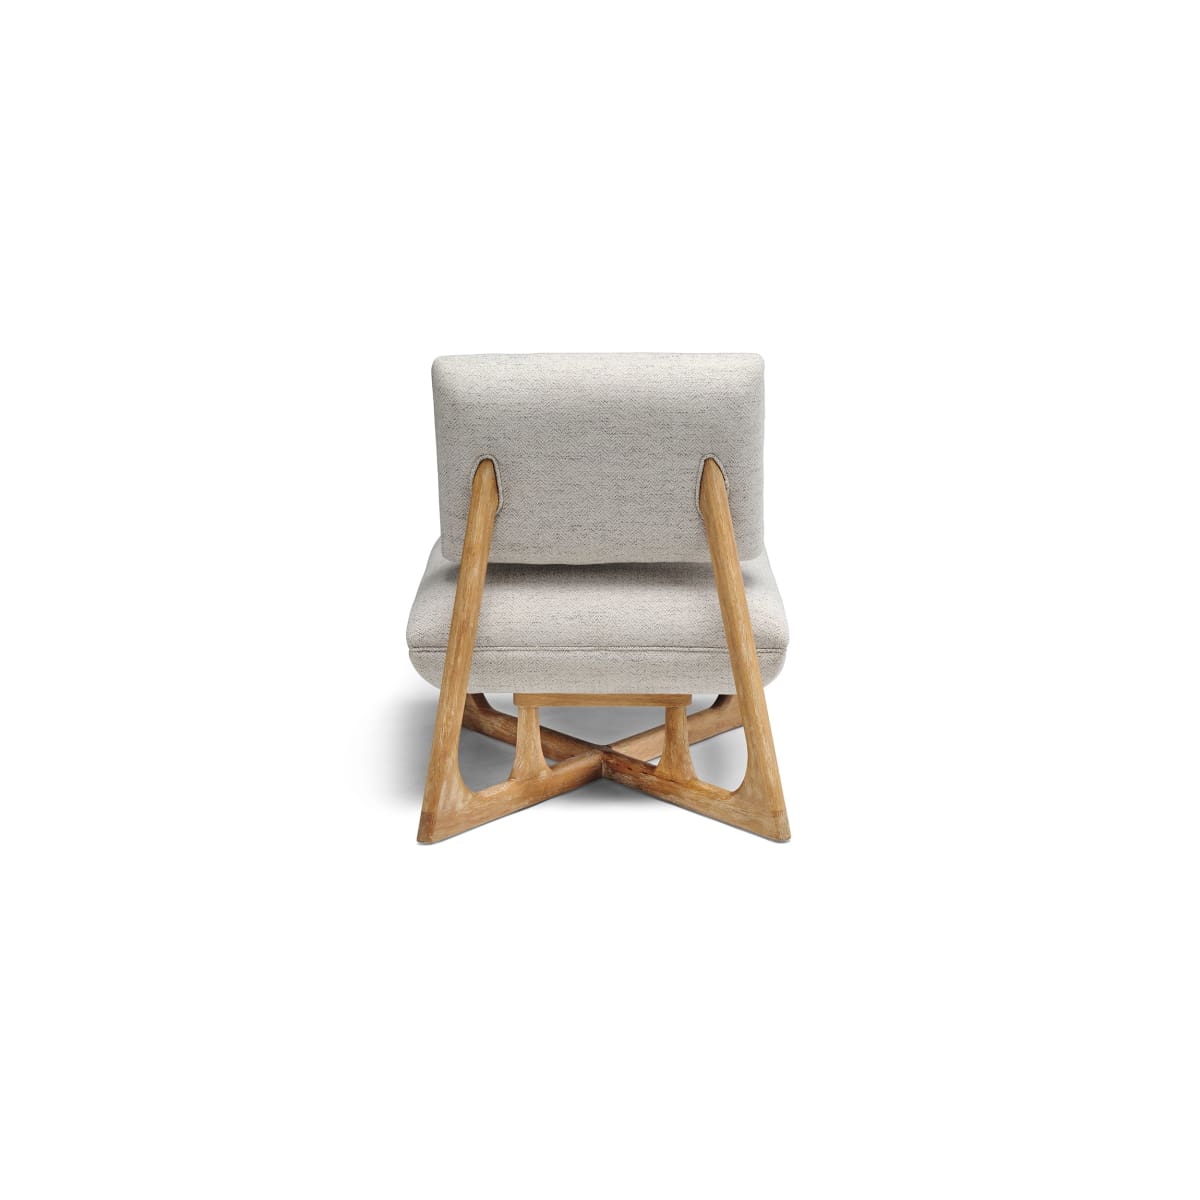 Meadow Chair - accent chairs